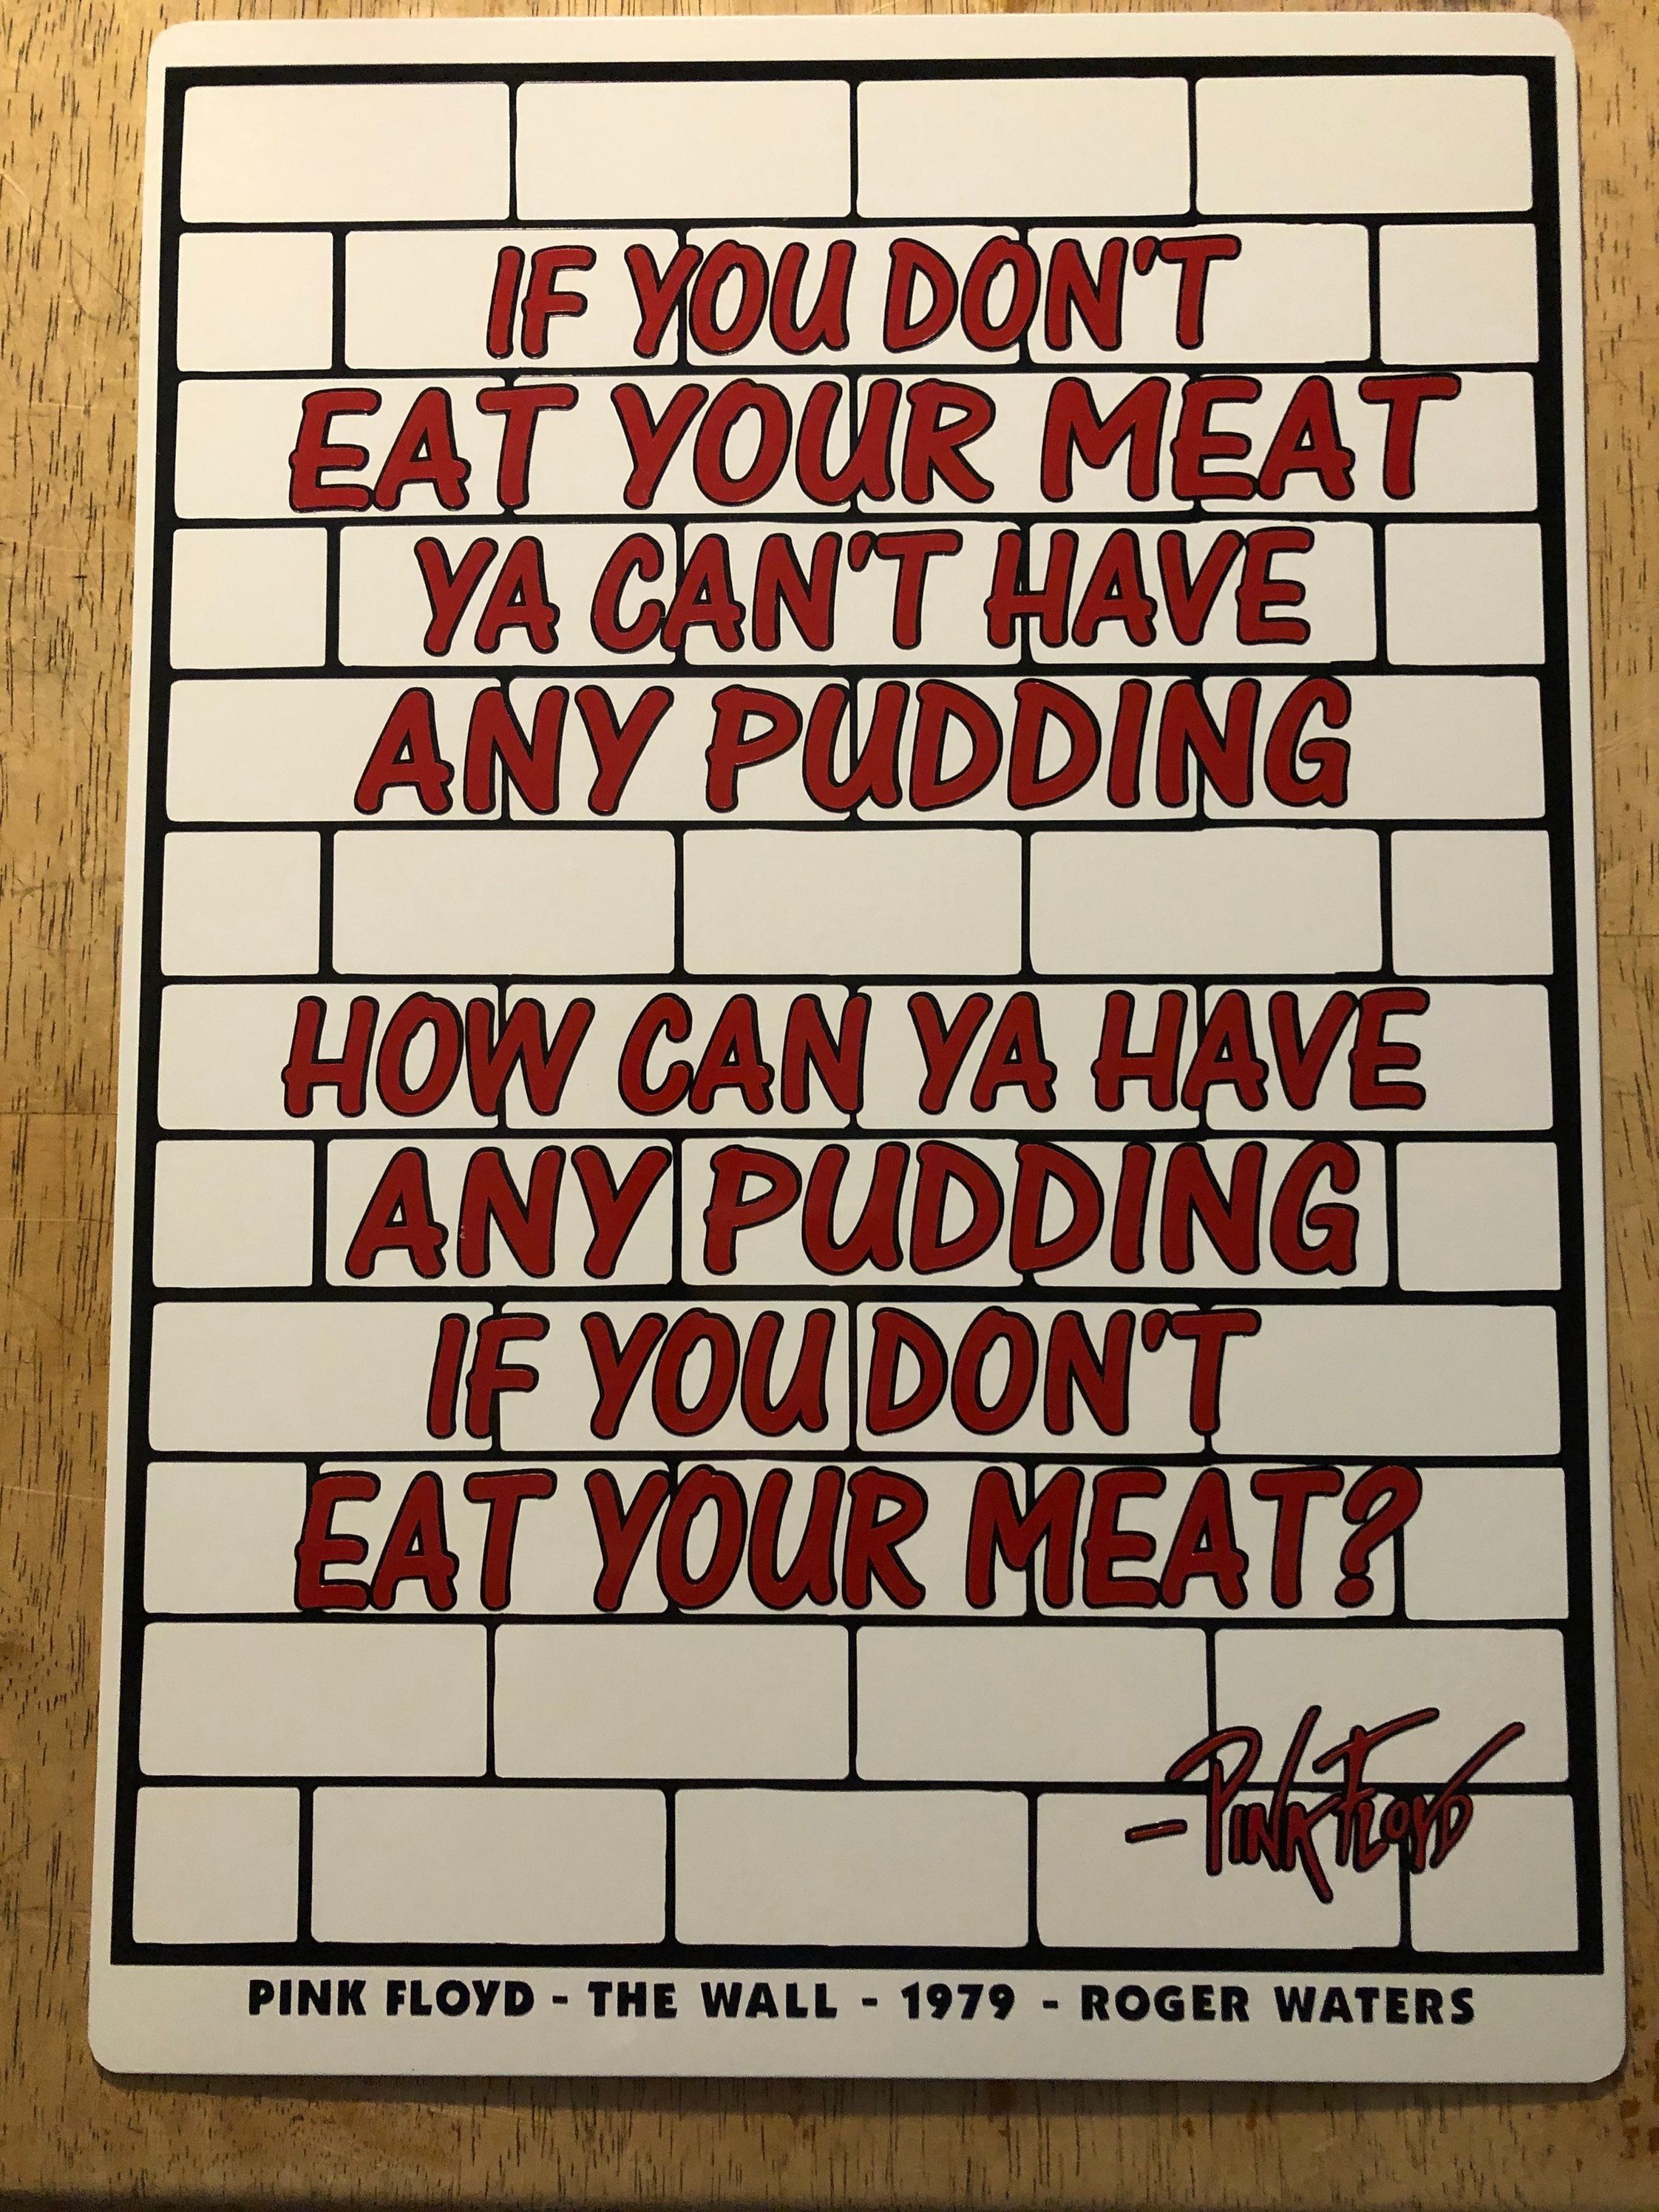 PINK FLOYD THE WALL ART SONG LYRICS METAL WALL SIGN GIFT MEAT